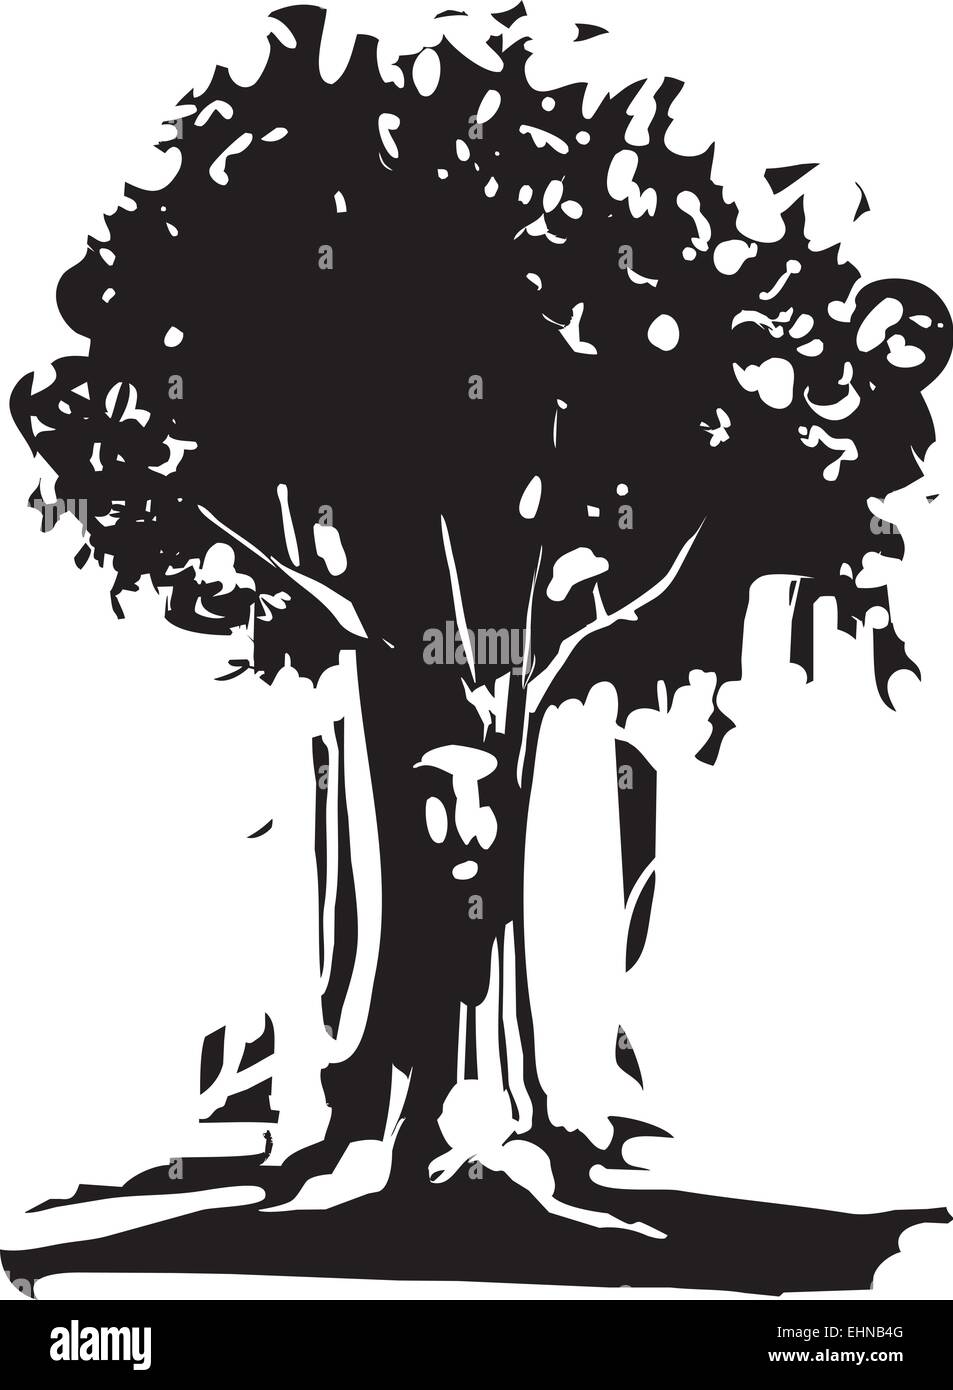 Woodcut style image of tree with a face on the trunk Stock Vector